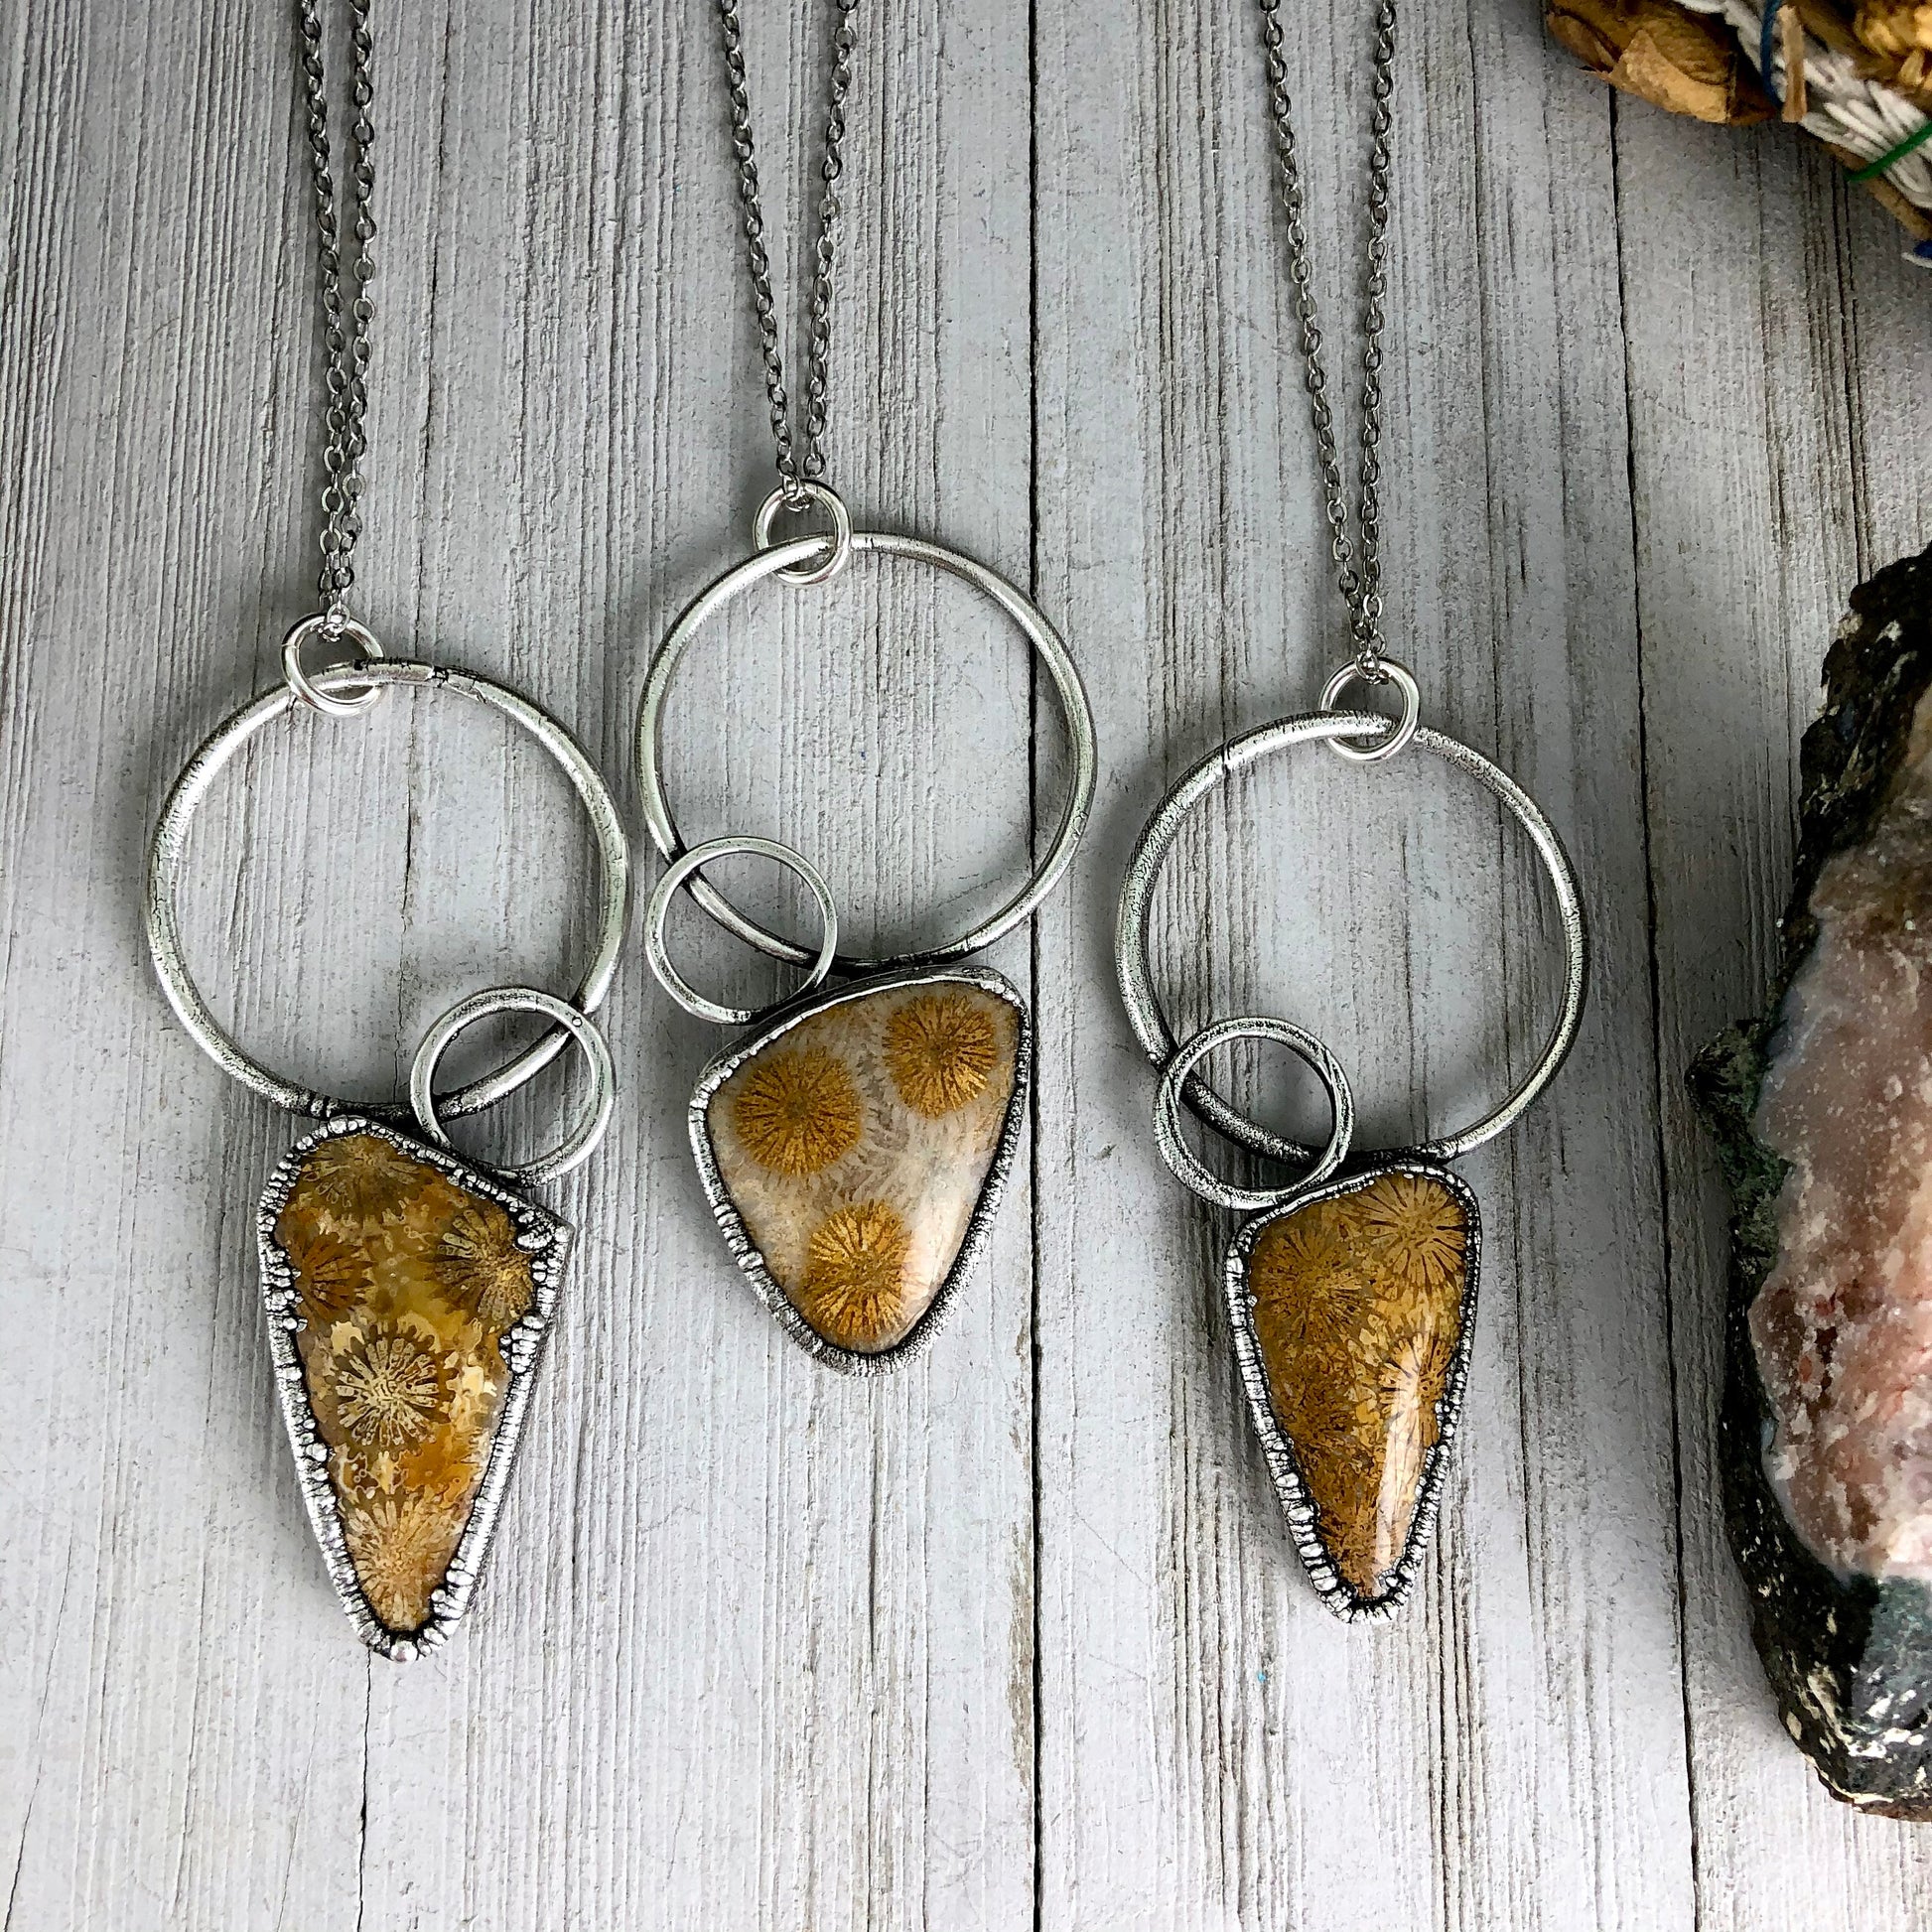 Bohemian Fashion, Bohemian Jewelry, Crystal Jewelry, Crystal Necklace, Crystal Necklaces, Crystal pendant, Etsy ID: 1100808239, Fossilized Coral, FOXLARK- NECKLACES, Gift for her, Healing Crystal, Jewelry, Jewelry For Woman, Necklaces, sale, Silver Jewelr